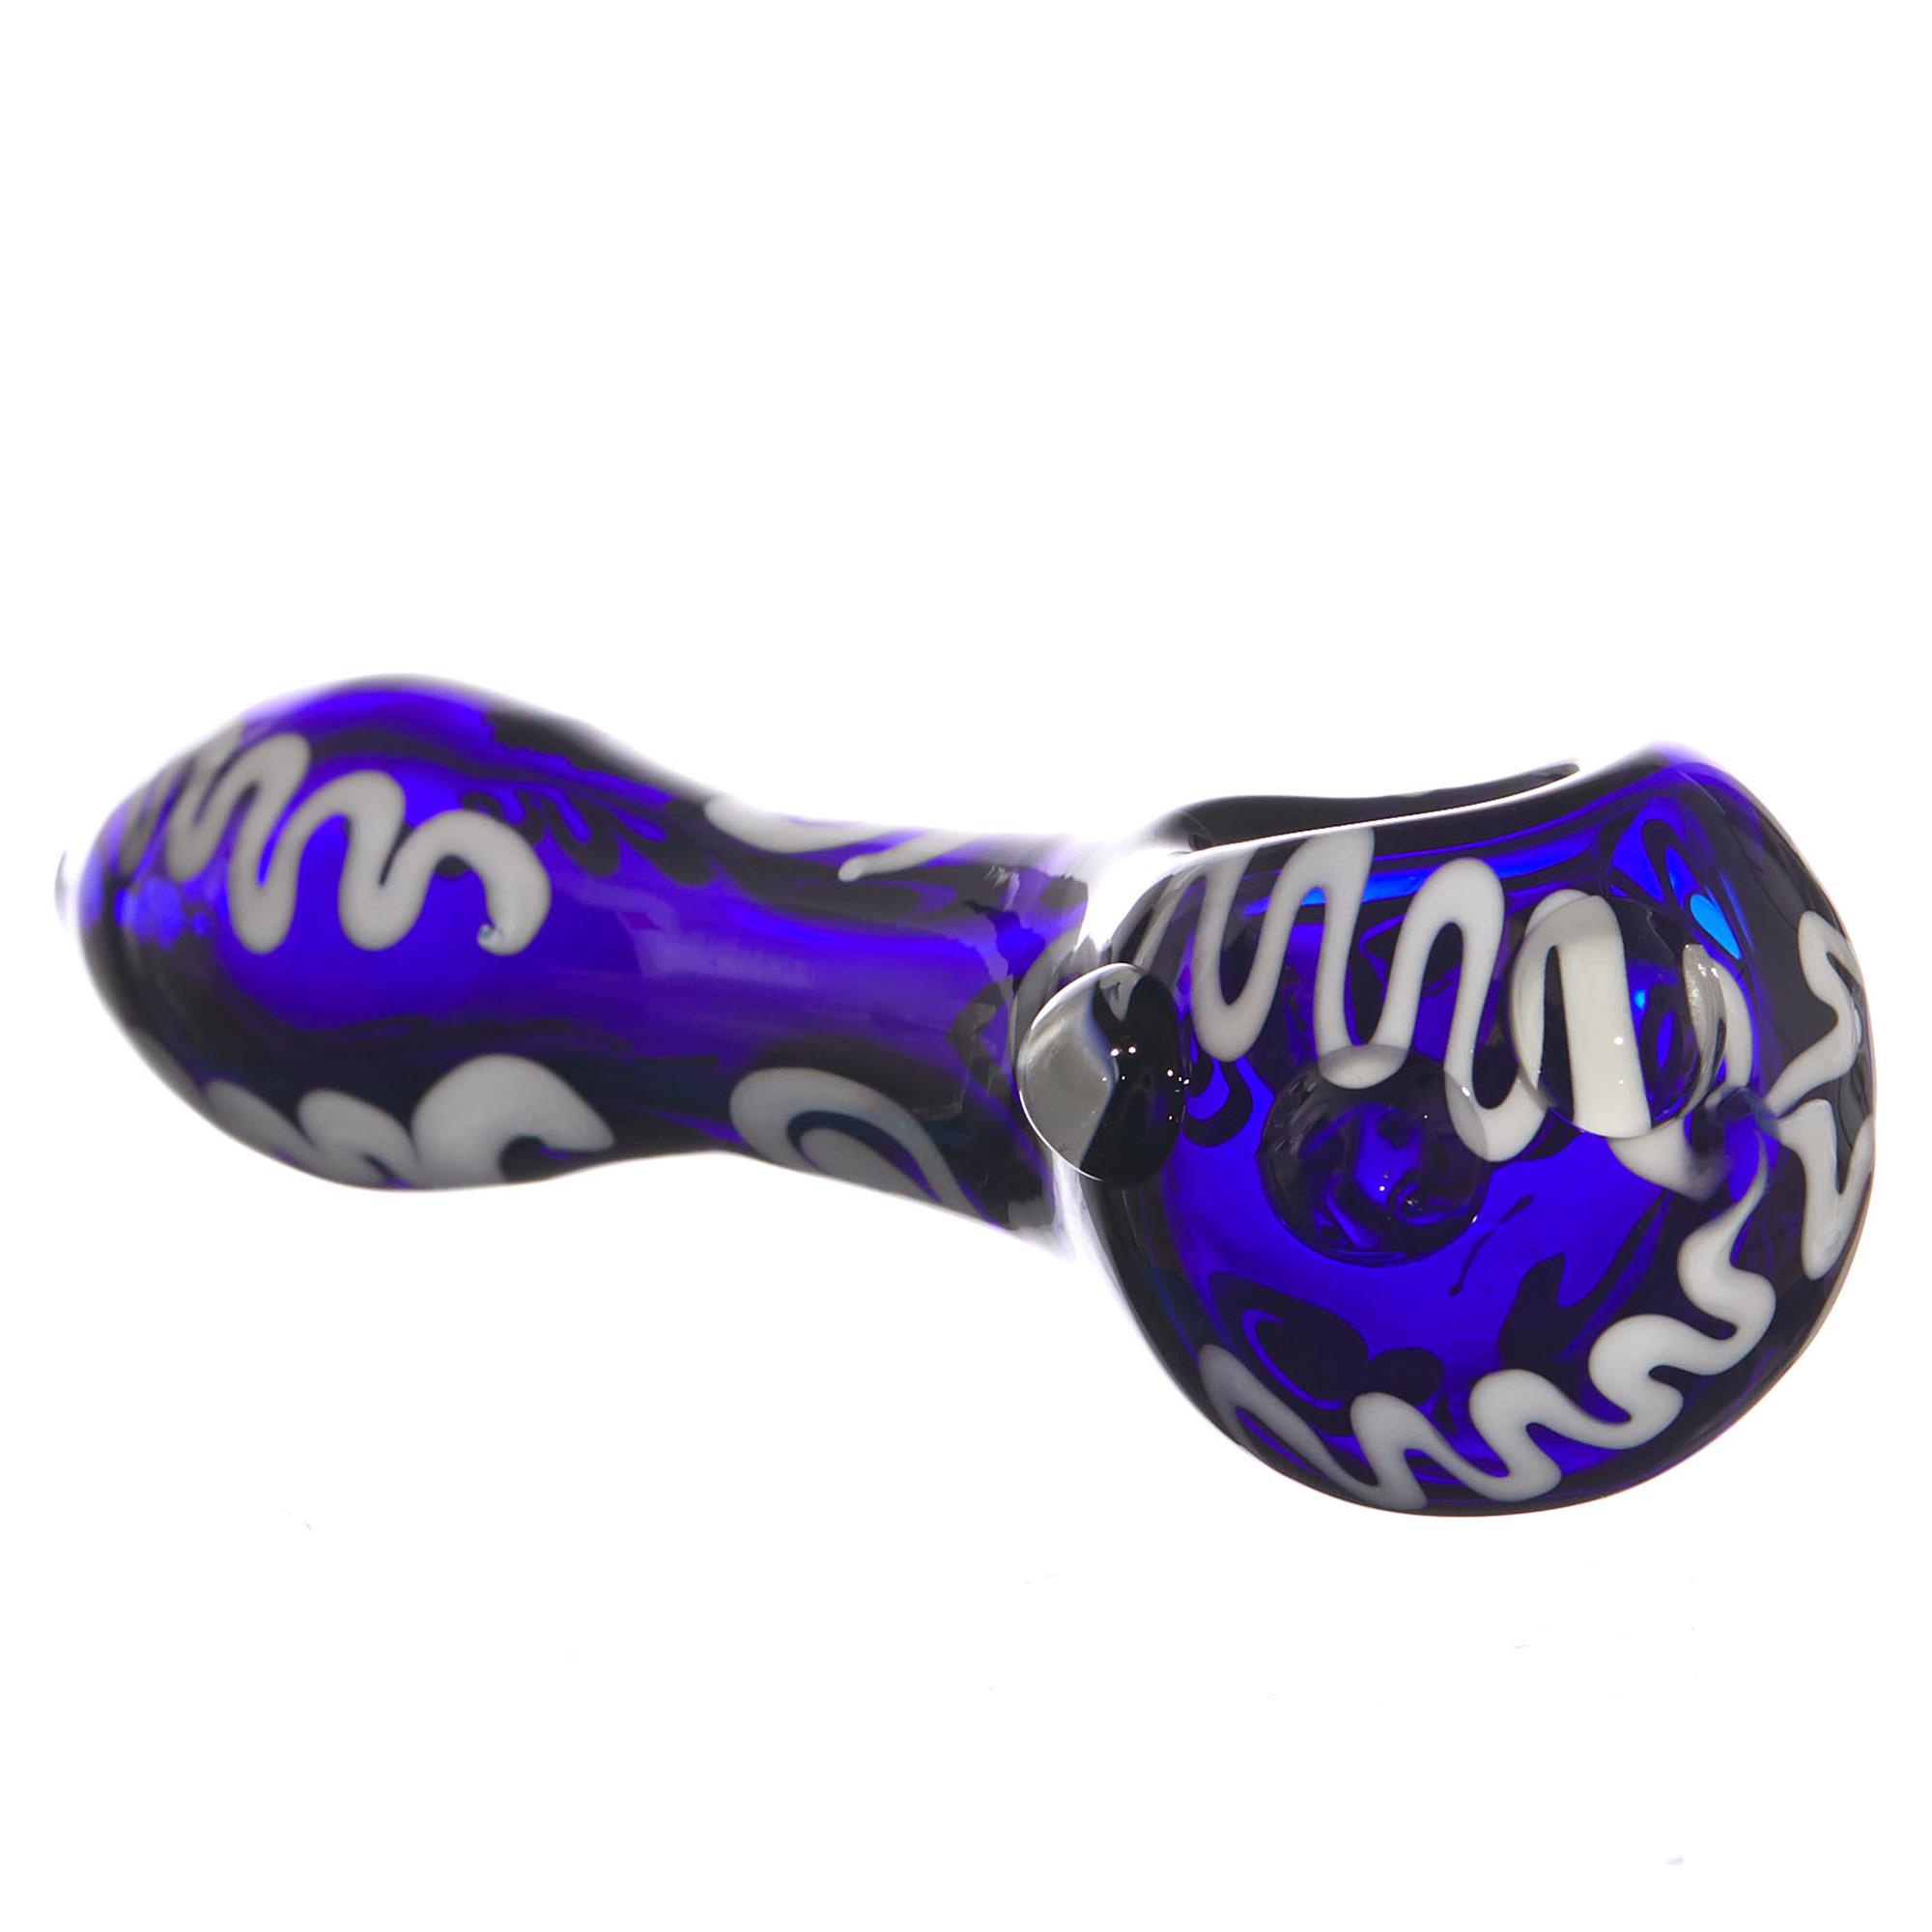 HIGHNESS SPOON PIPE